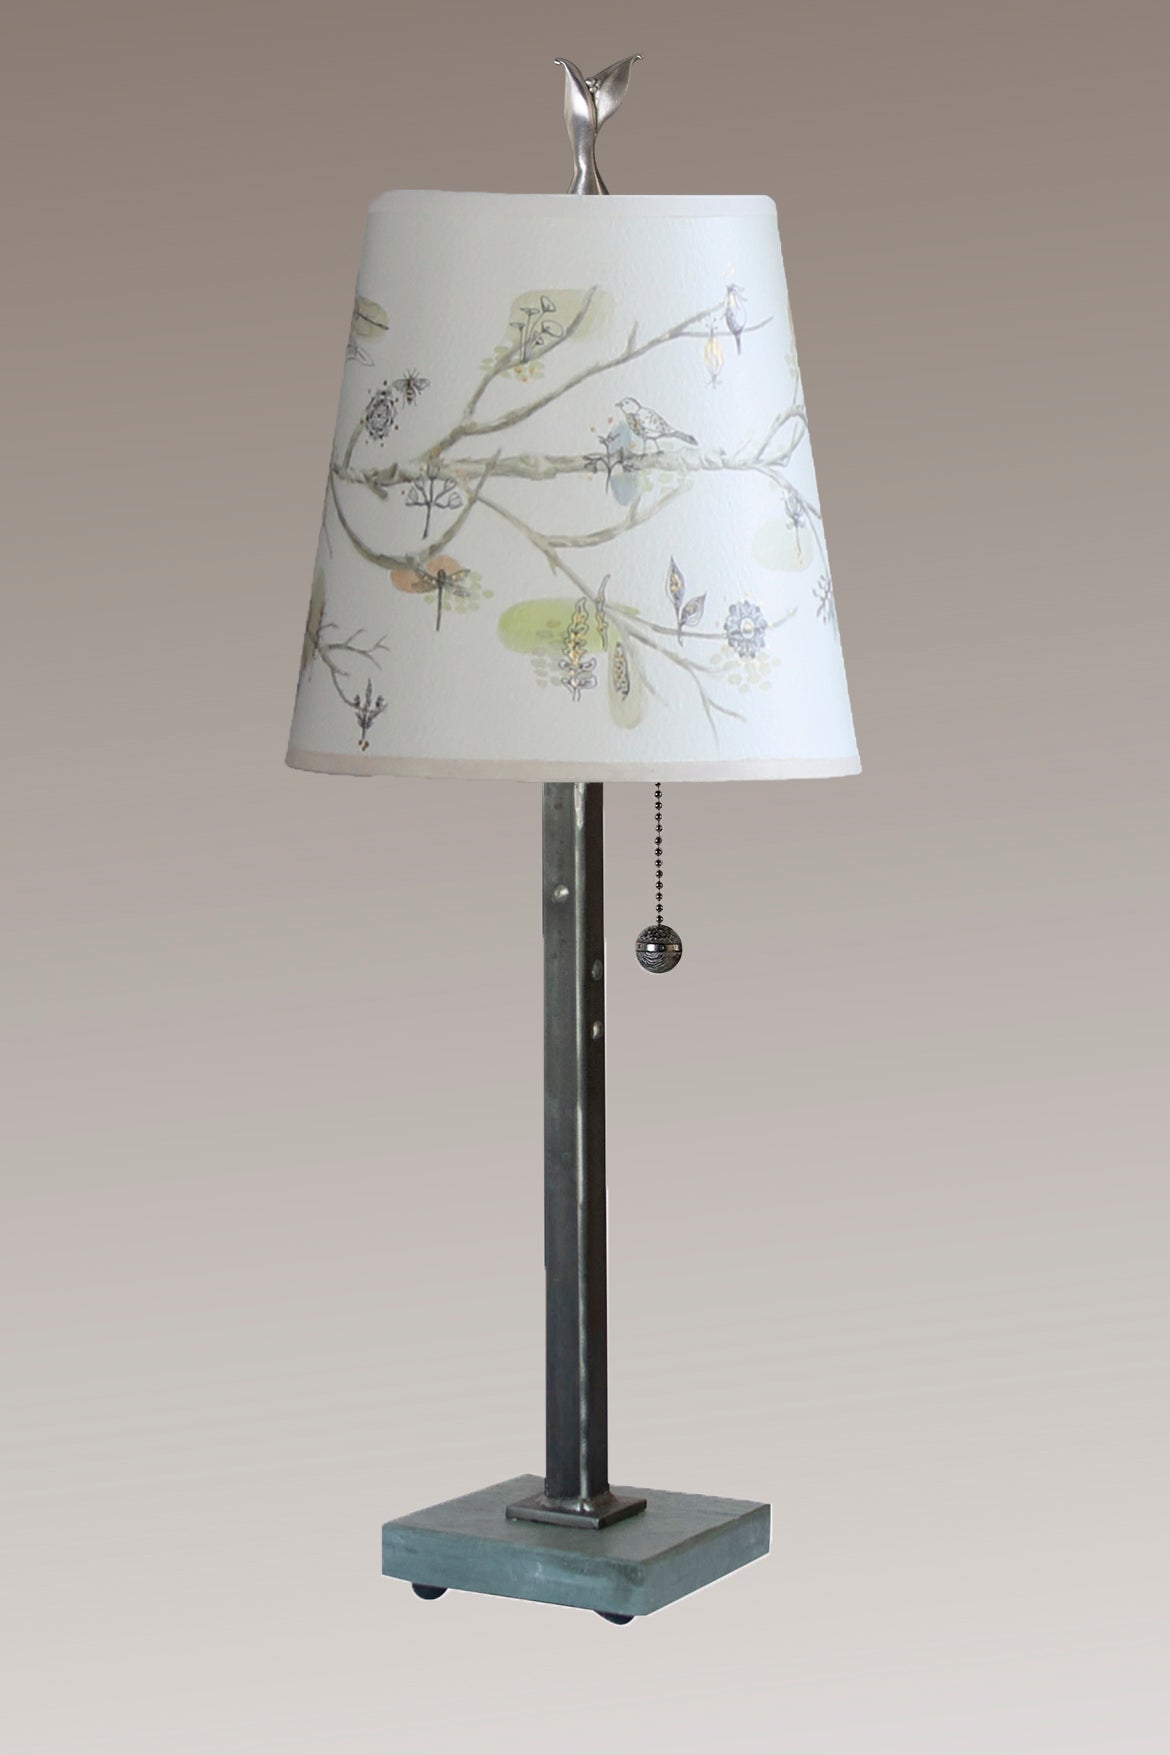 Steel Table Lamp with Small Drum Shade in Artful Branch